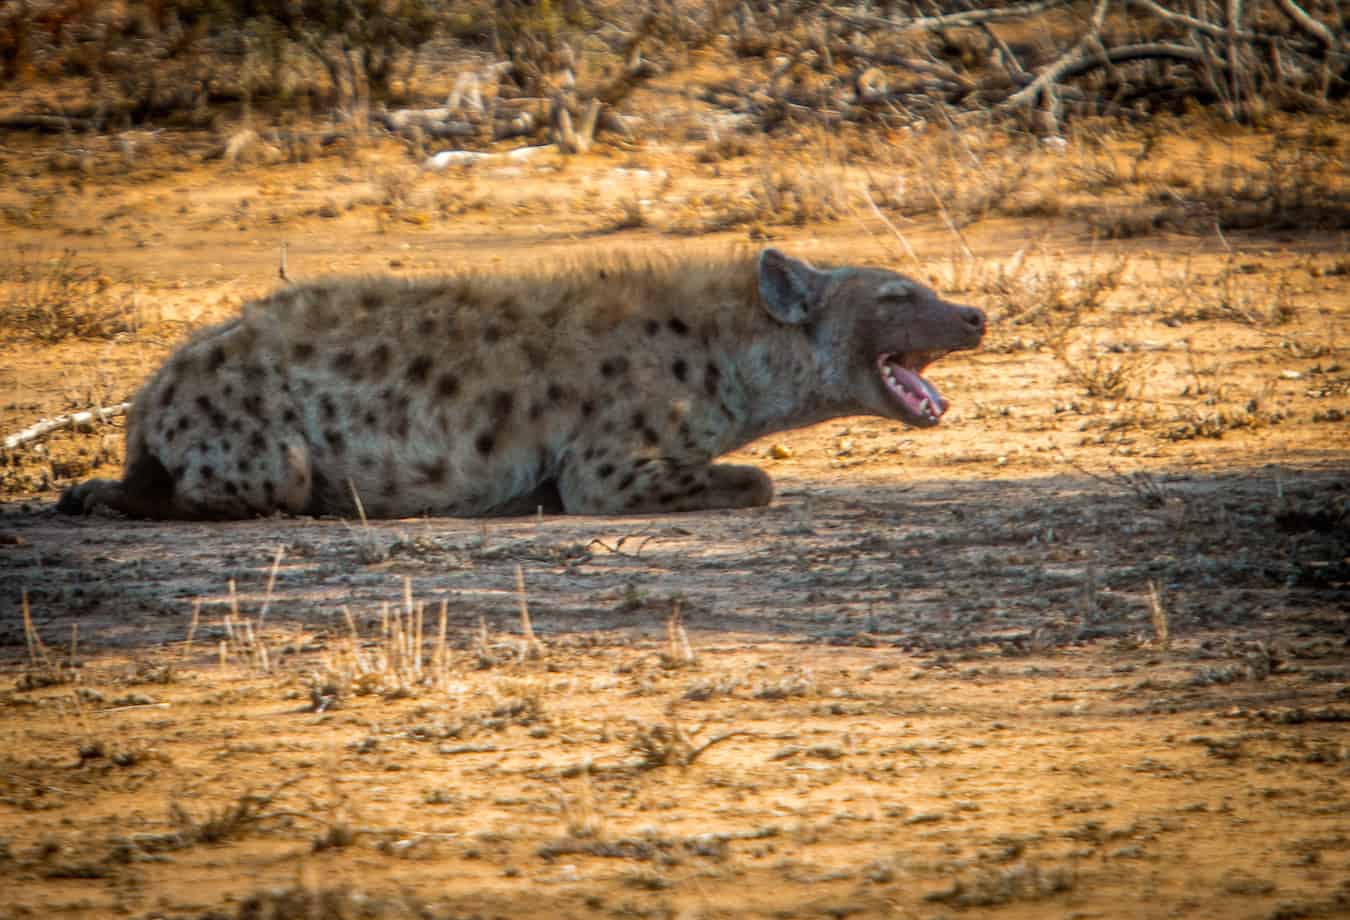 Sleepy Spotted Hyena napping in the shade